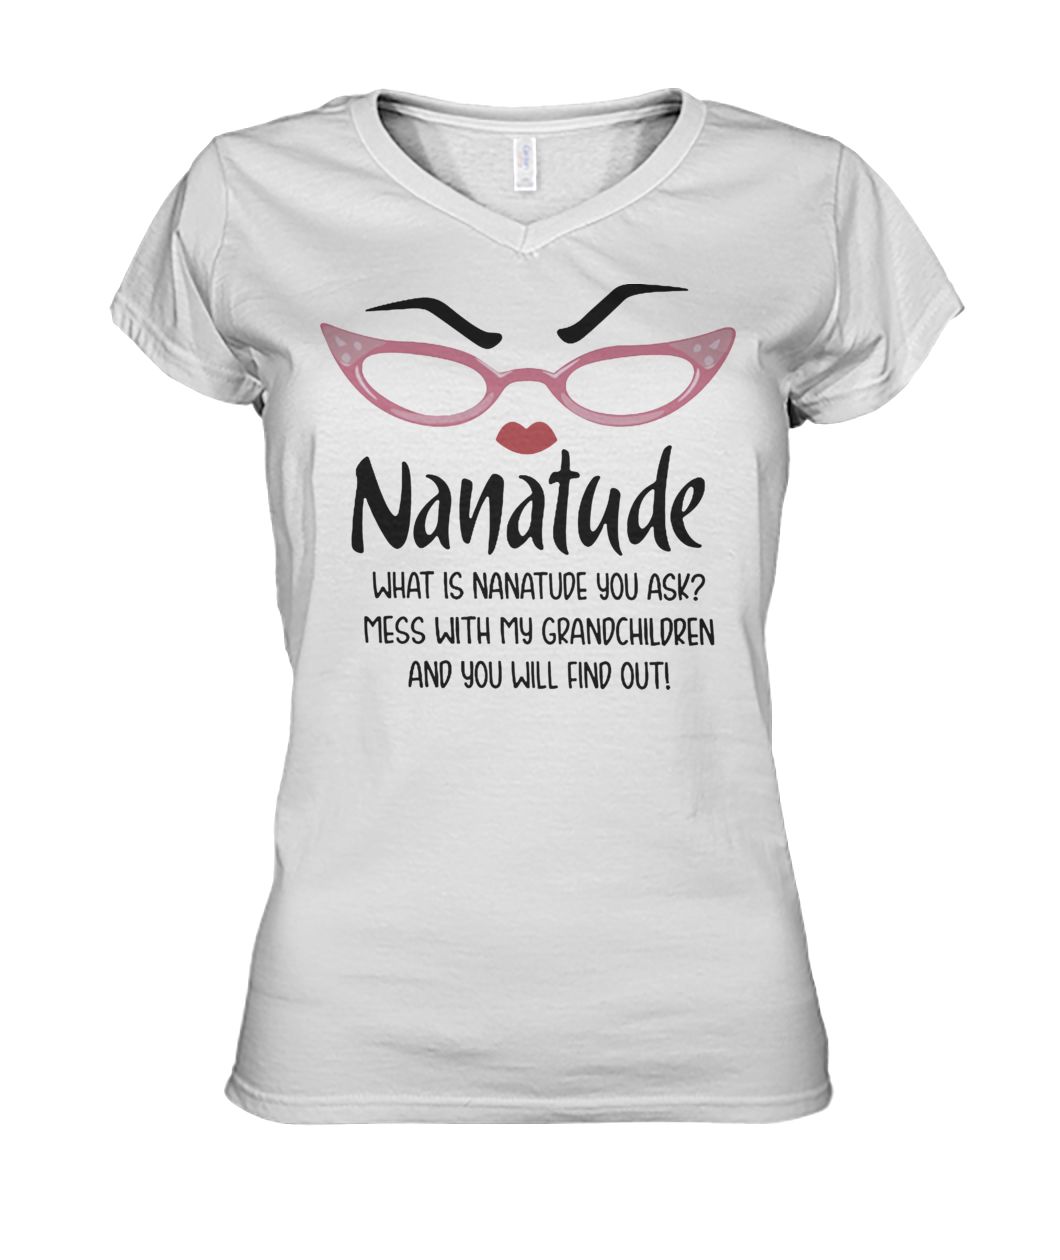 Nanatude what is nanatude you ask mess with my grandchildren and you will find out women's v-neck